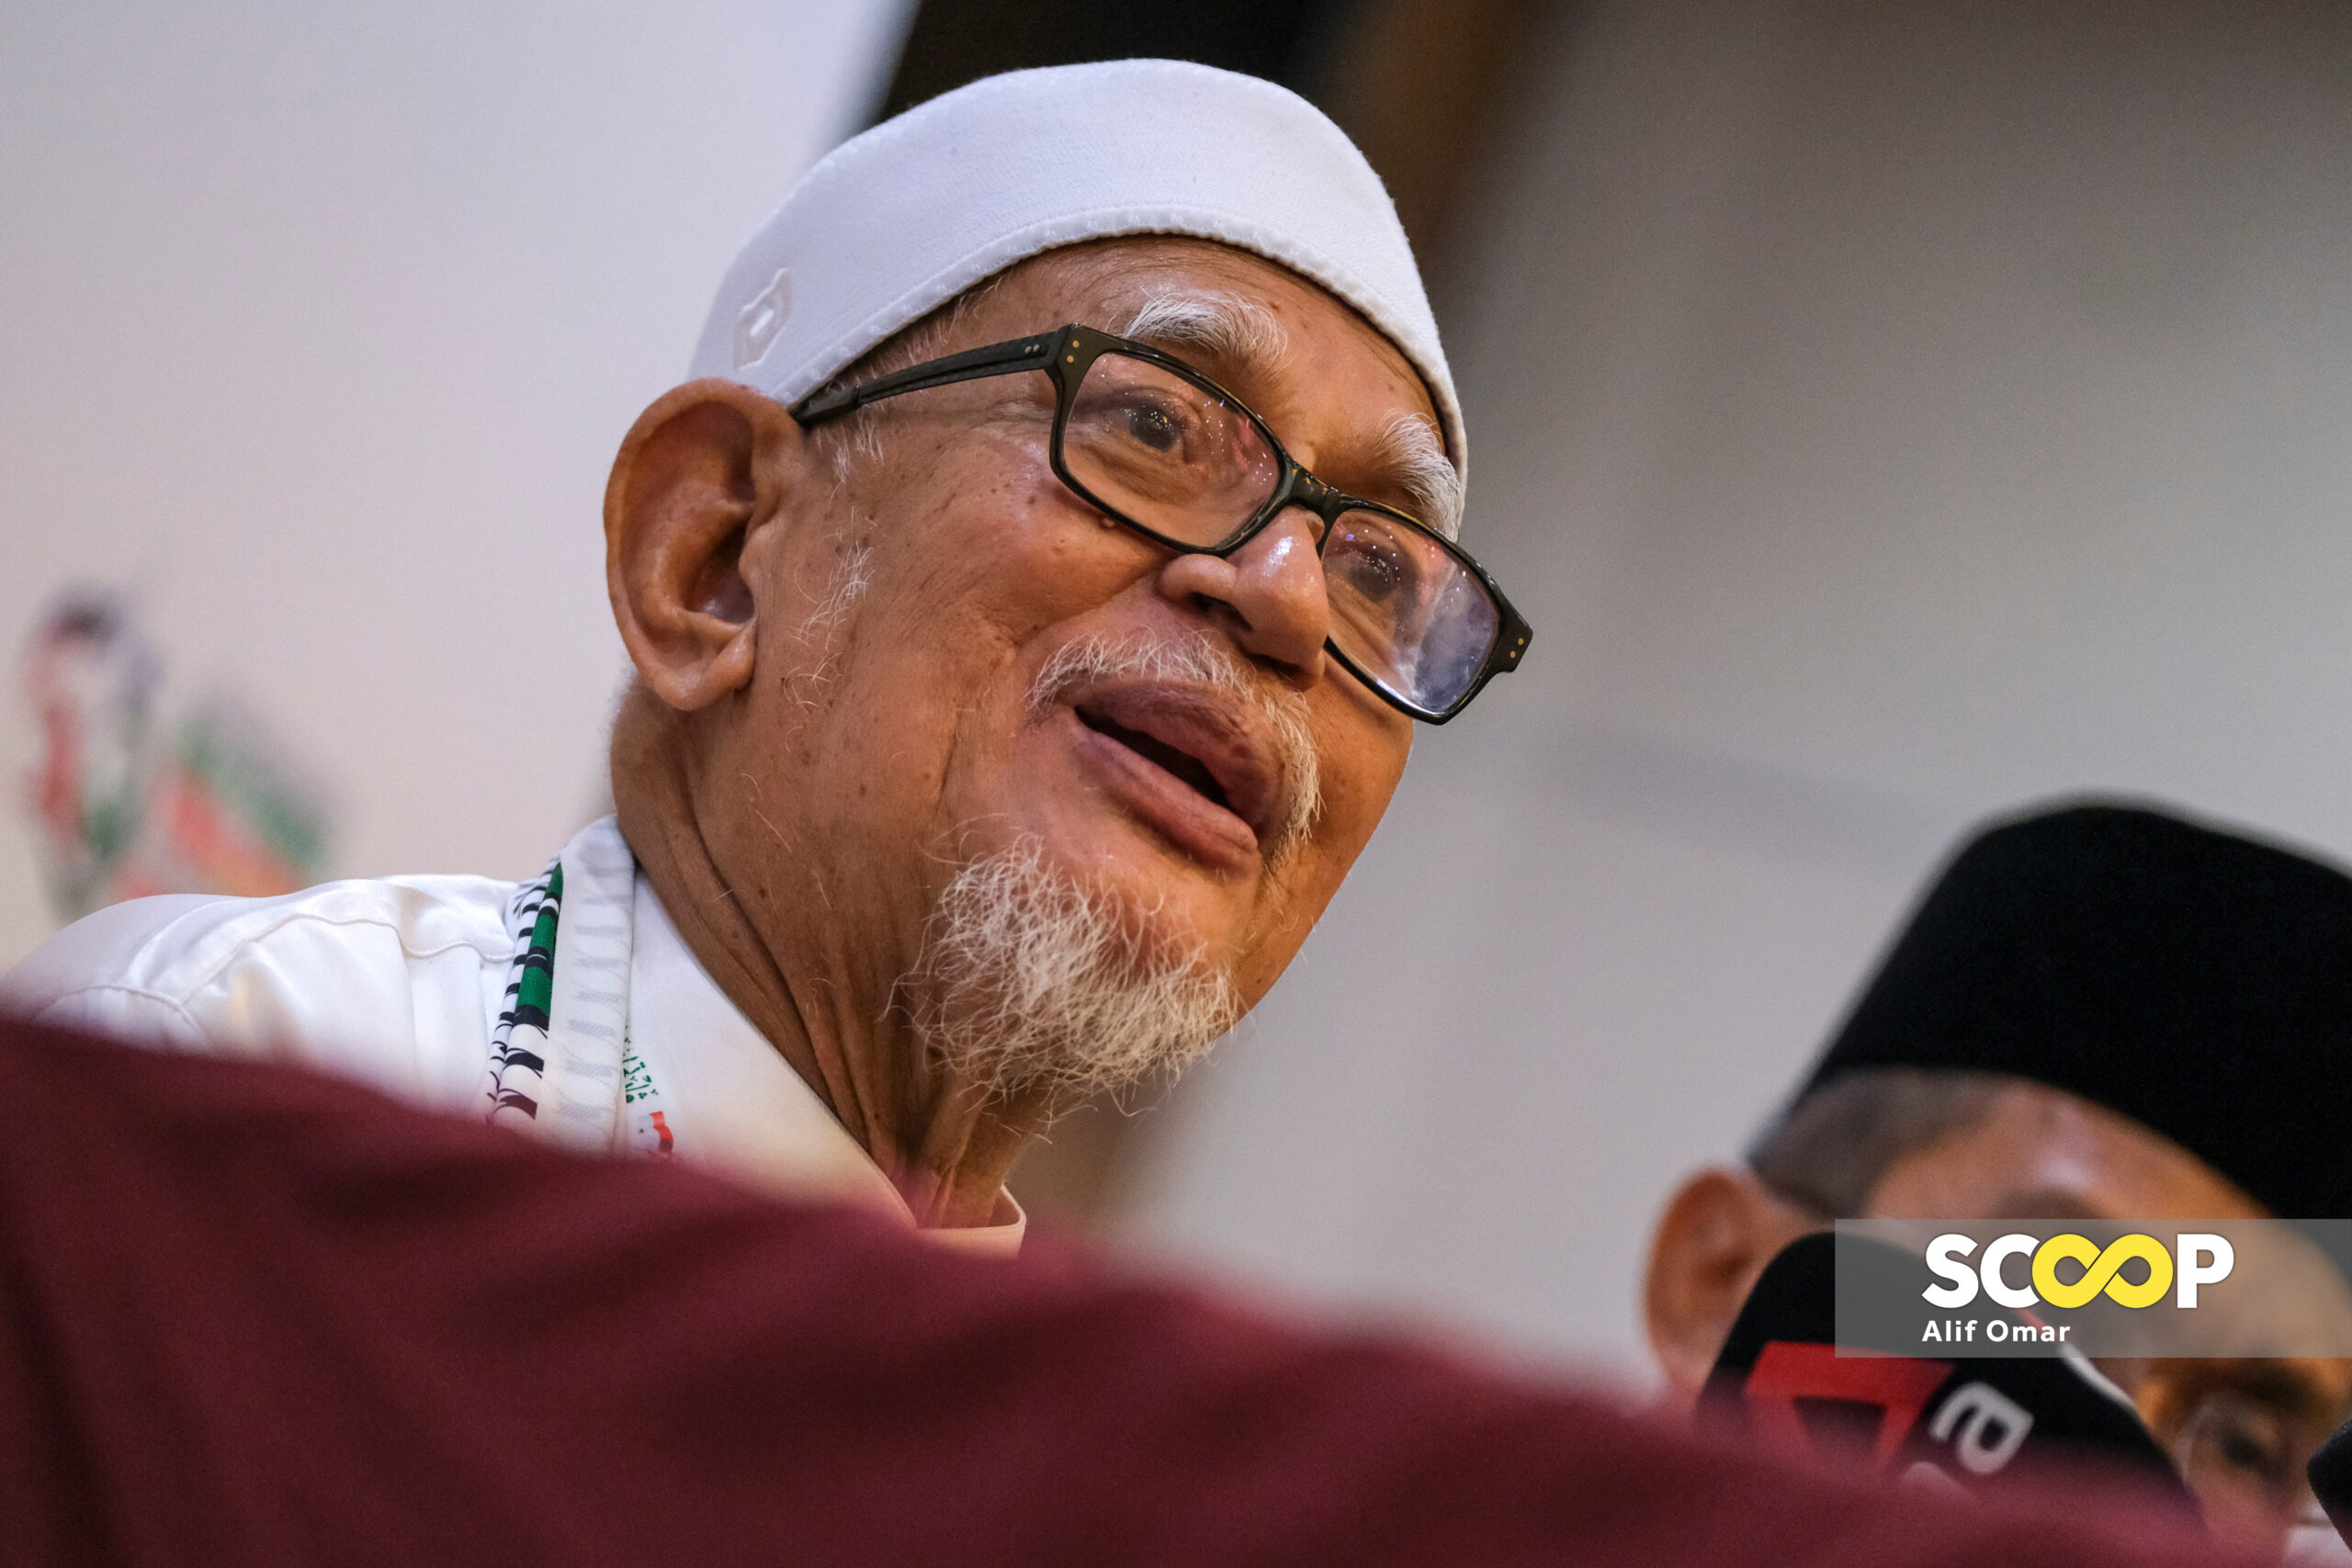 Cops to take Hadi’s statement tomorrow over allegedly offensive article